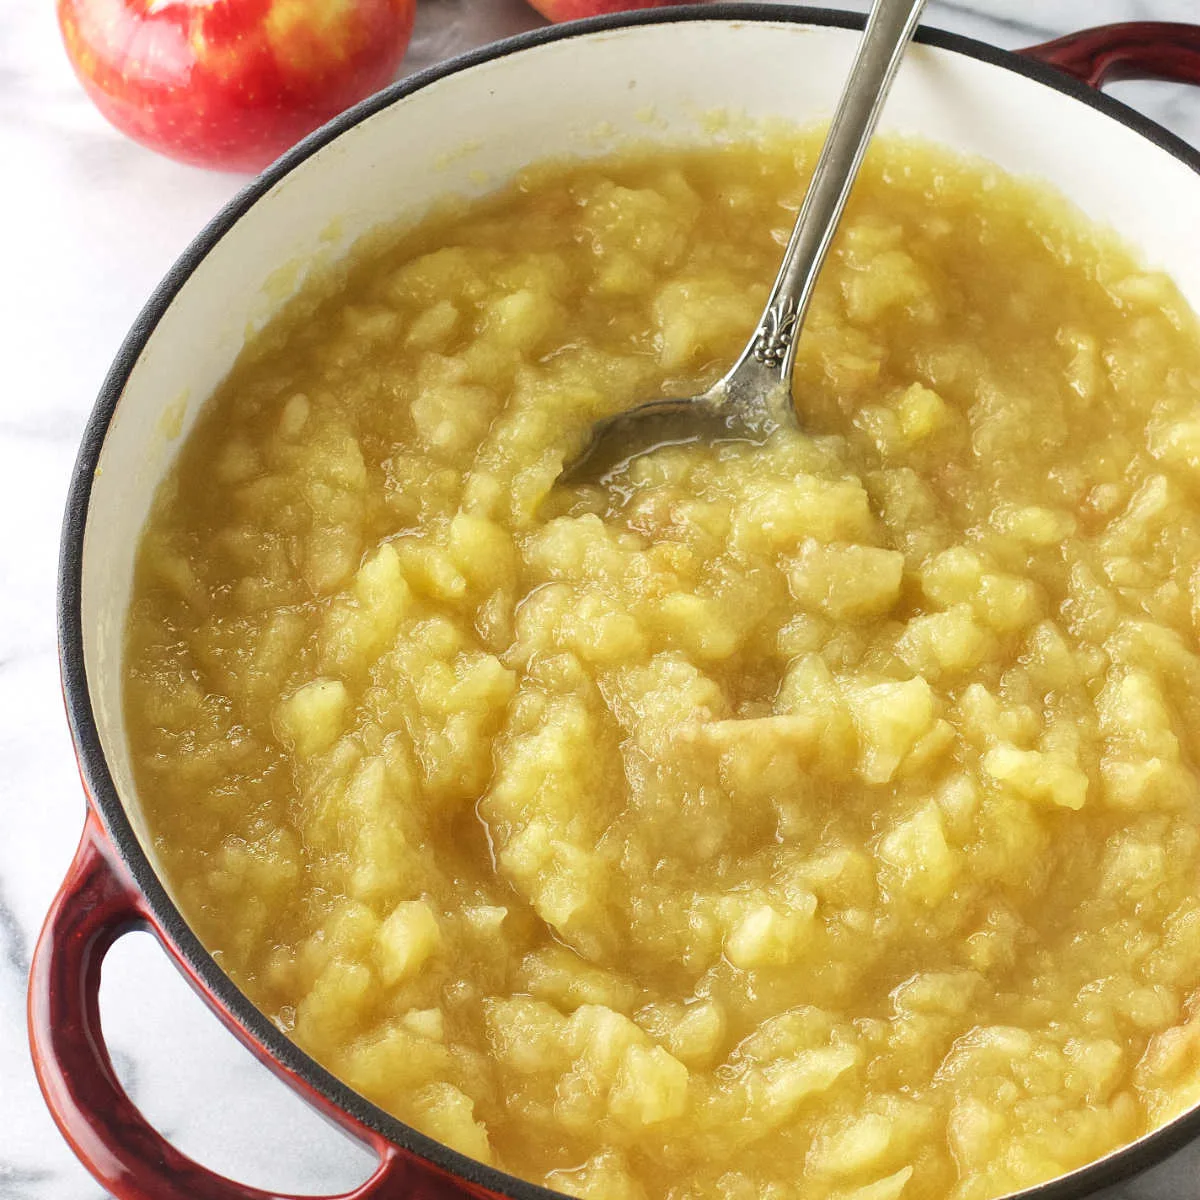 A pot of unsweetened applesauce with a serving spoon.